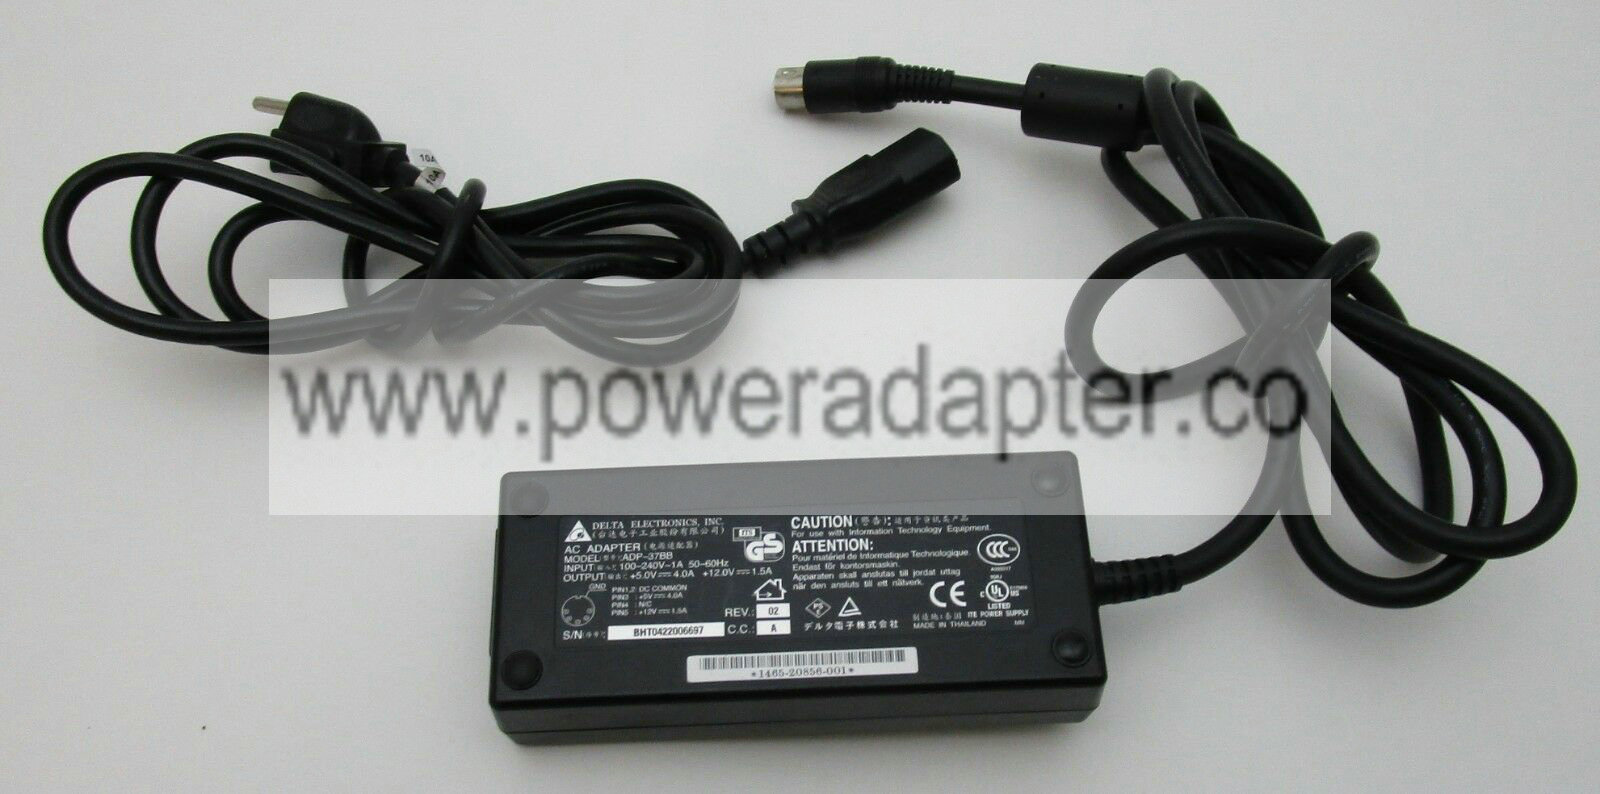 Polycom ViewStation 5V 4A 12V 1.5A AC Power Adapter ADP-37BB Bundled Items: Power Cable MPN: ADP-37BB Output Voltage(